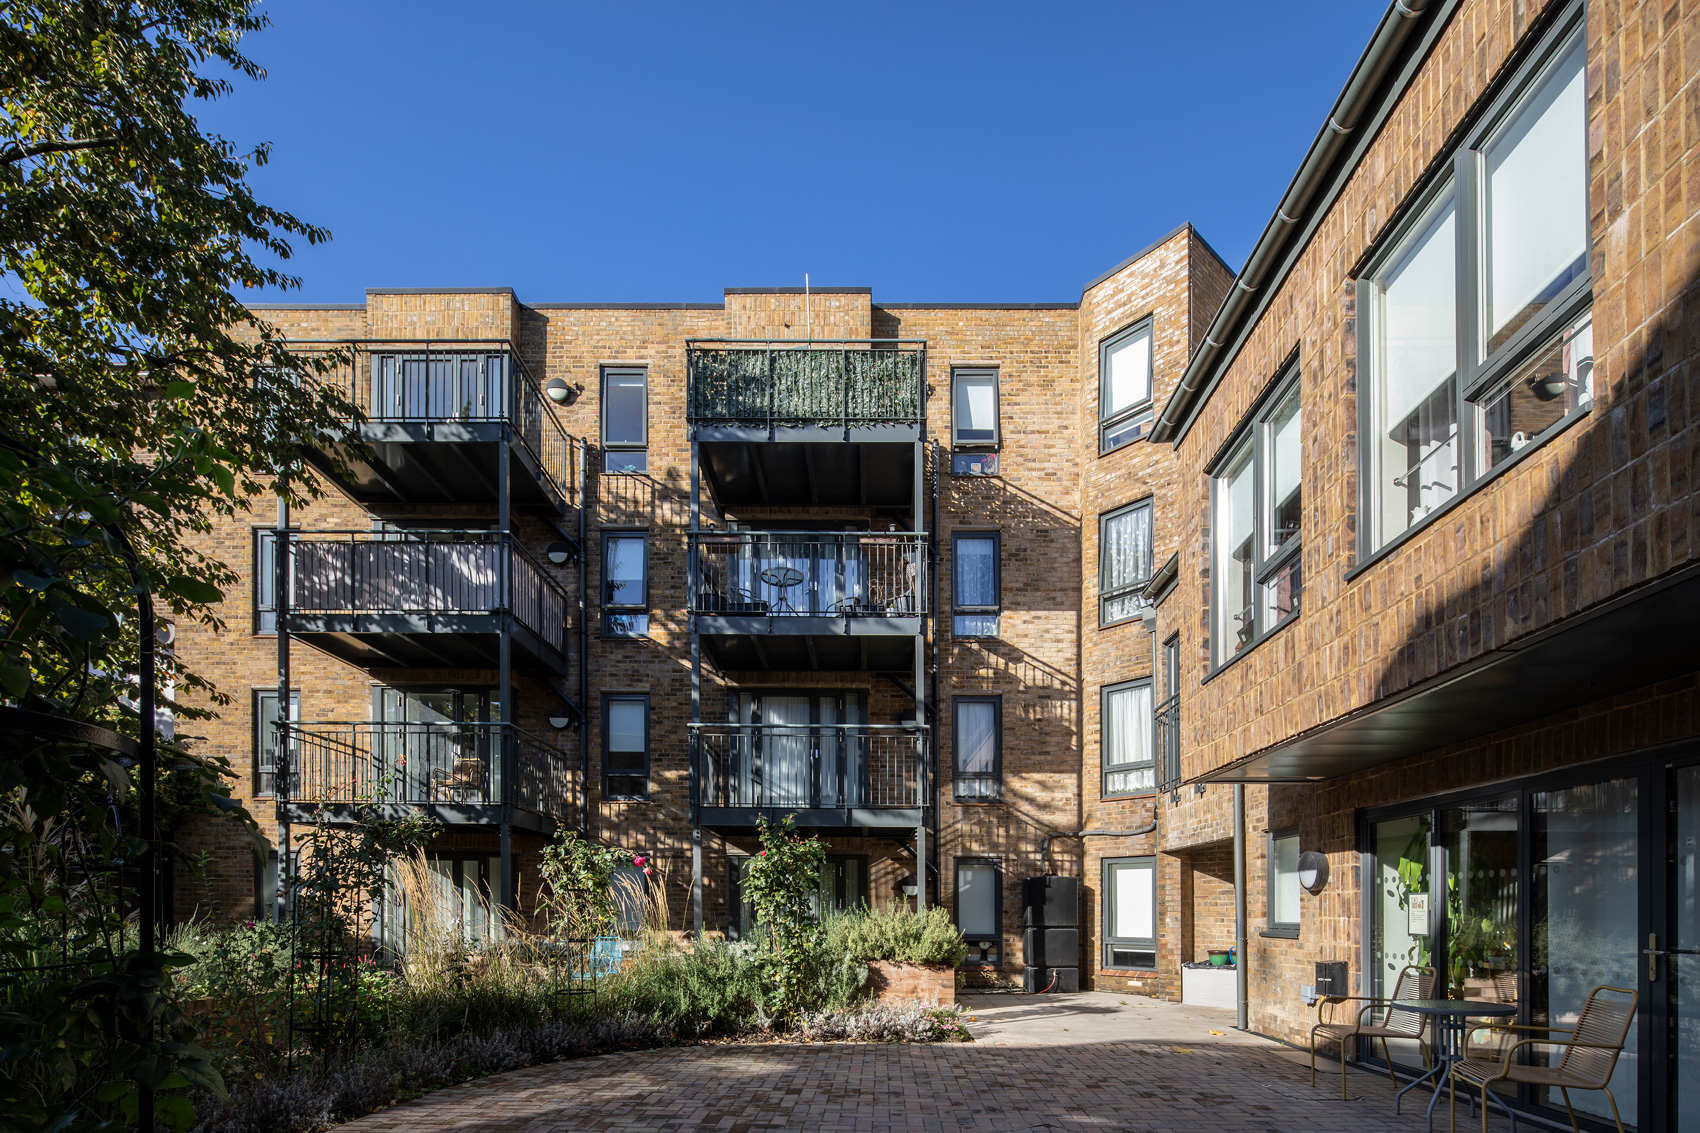 Retirement, Retirement Housing, Ashton Court, camden, conservation area, London, Residential Architecture, Residential, WWA Studios, WWA, West Waddy Archadia, West Waddy, Archadia, Architecture, Urban Design, Town Planning